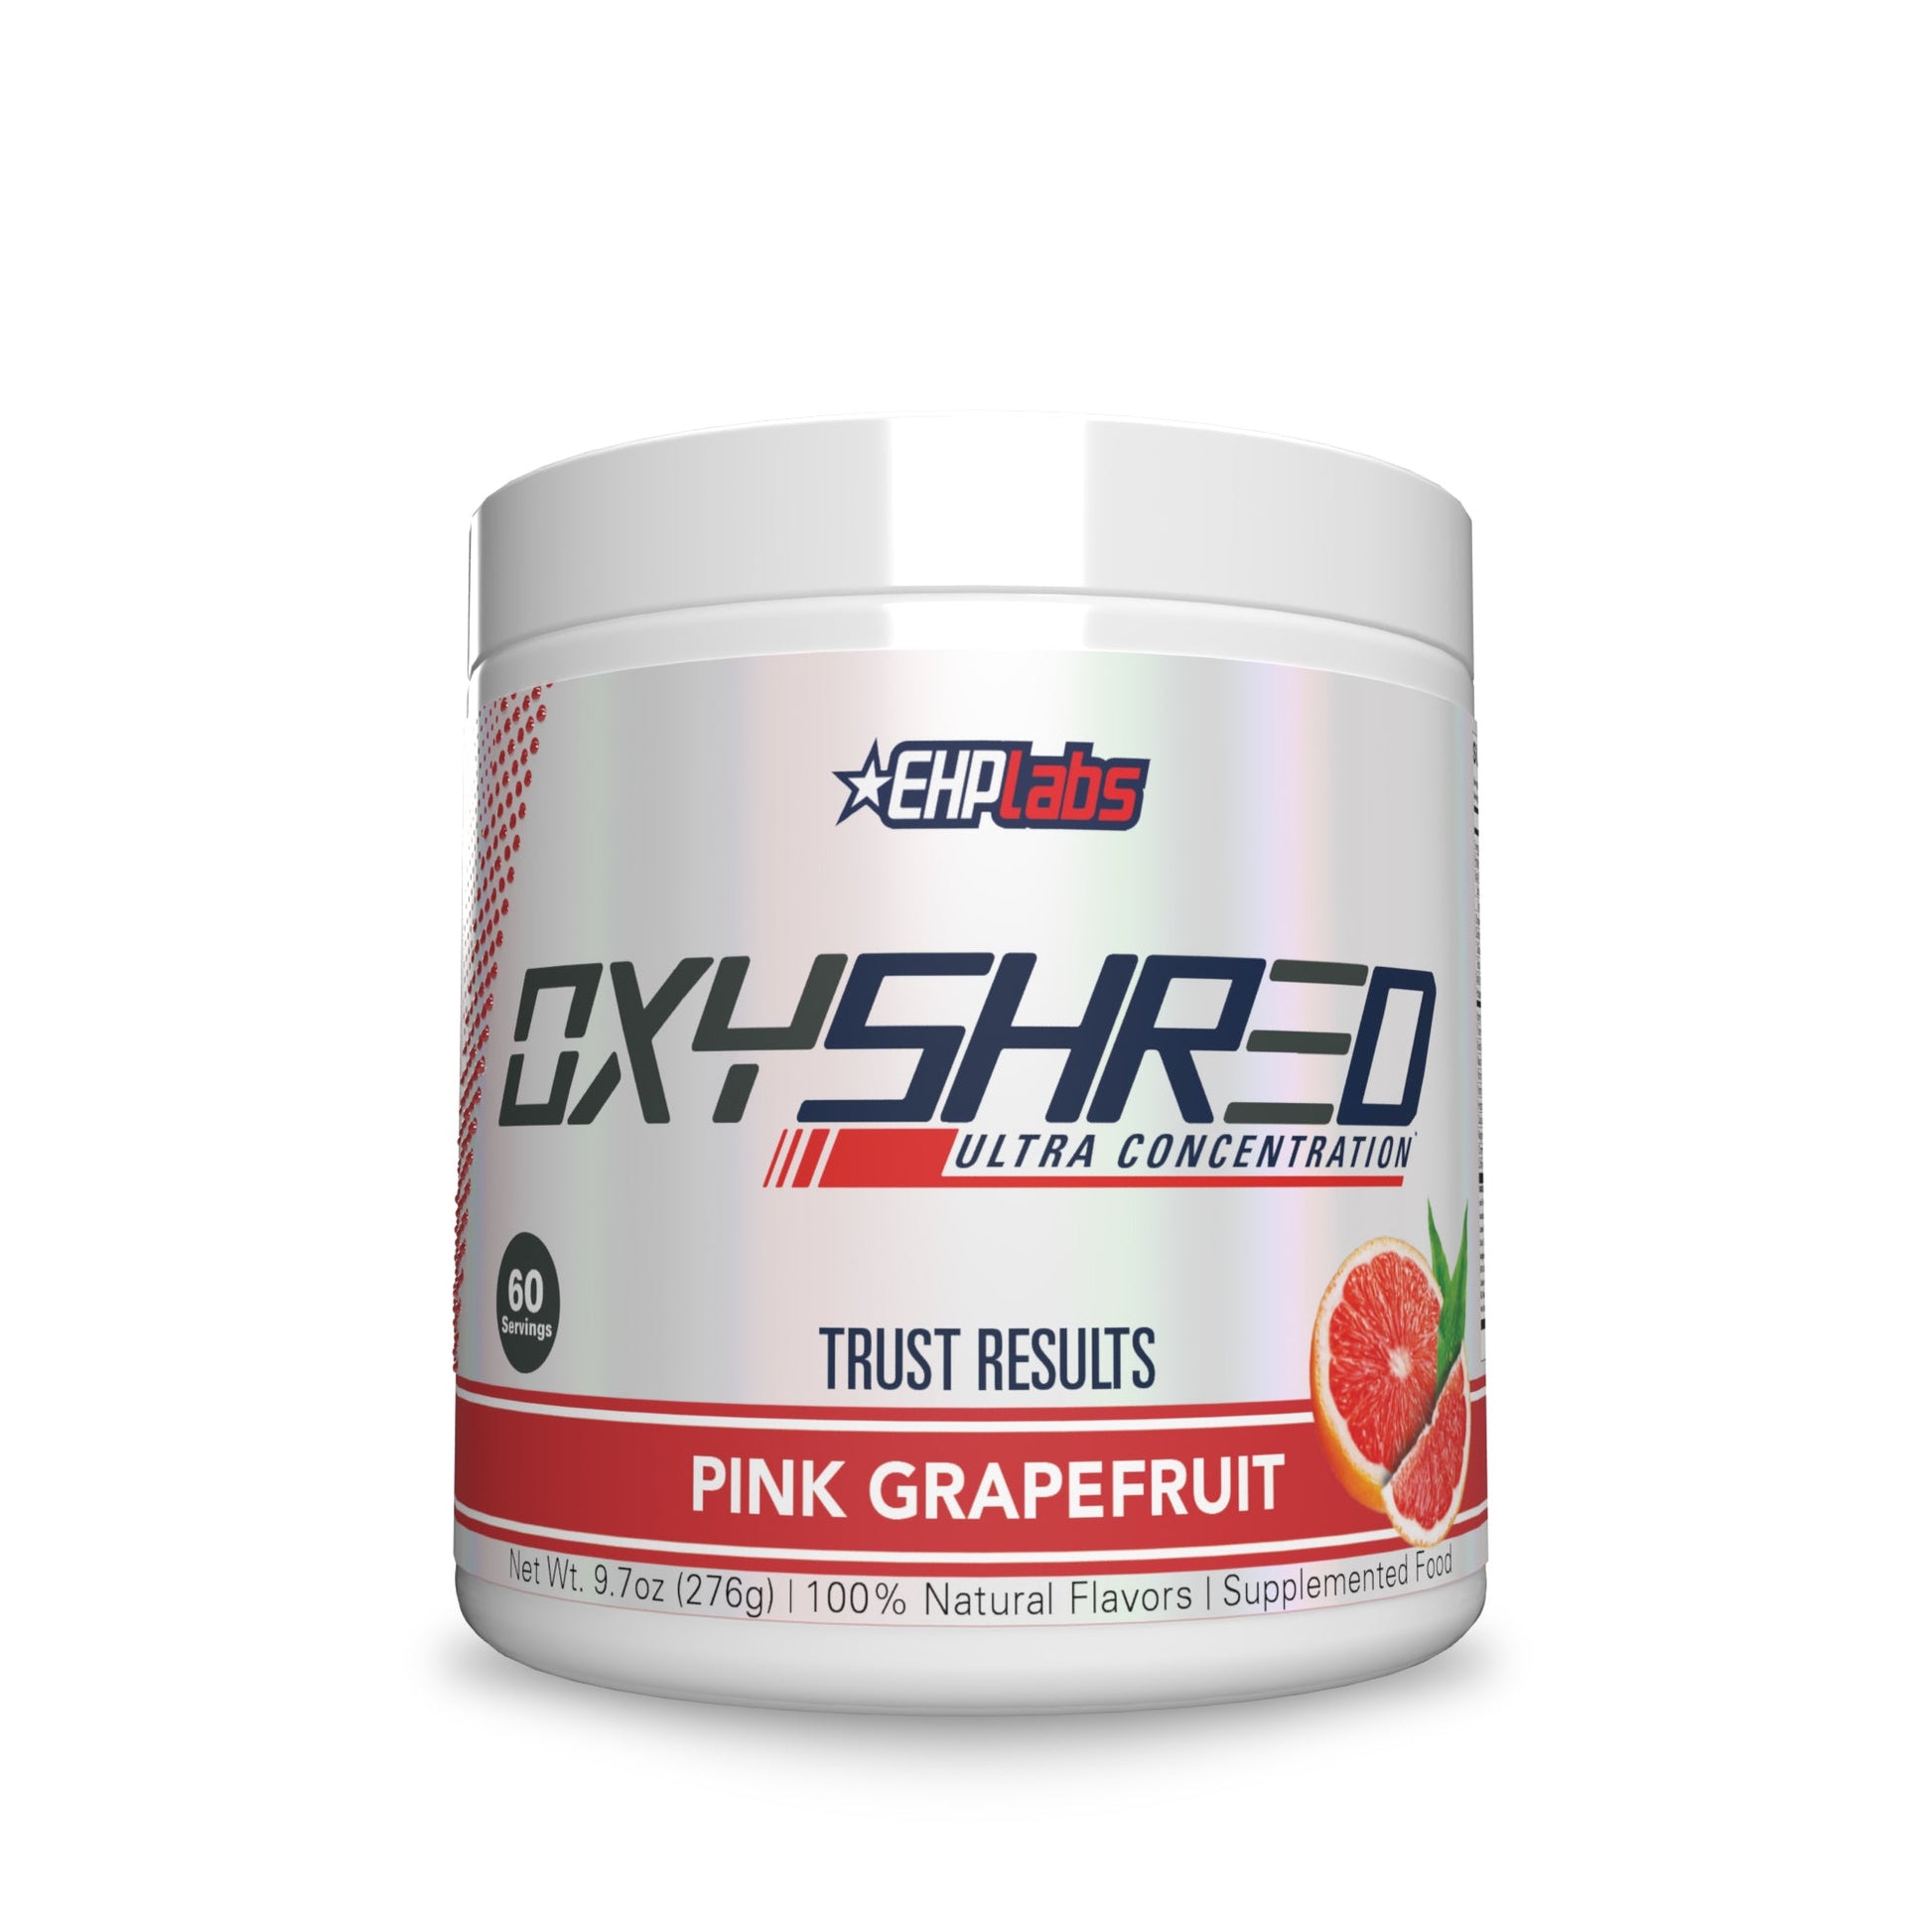 EHP Labs OxyShred Ultra Concentration 60 Serves - Supplements - Pink Grapefruit - The Cave Gym